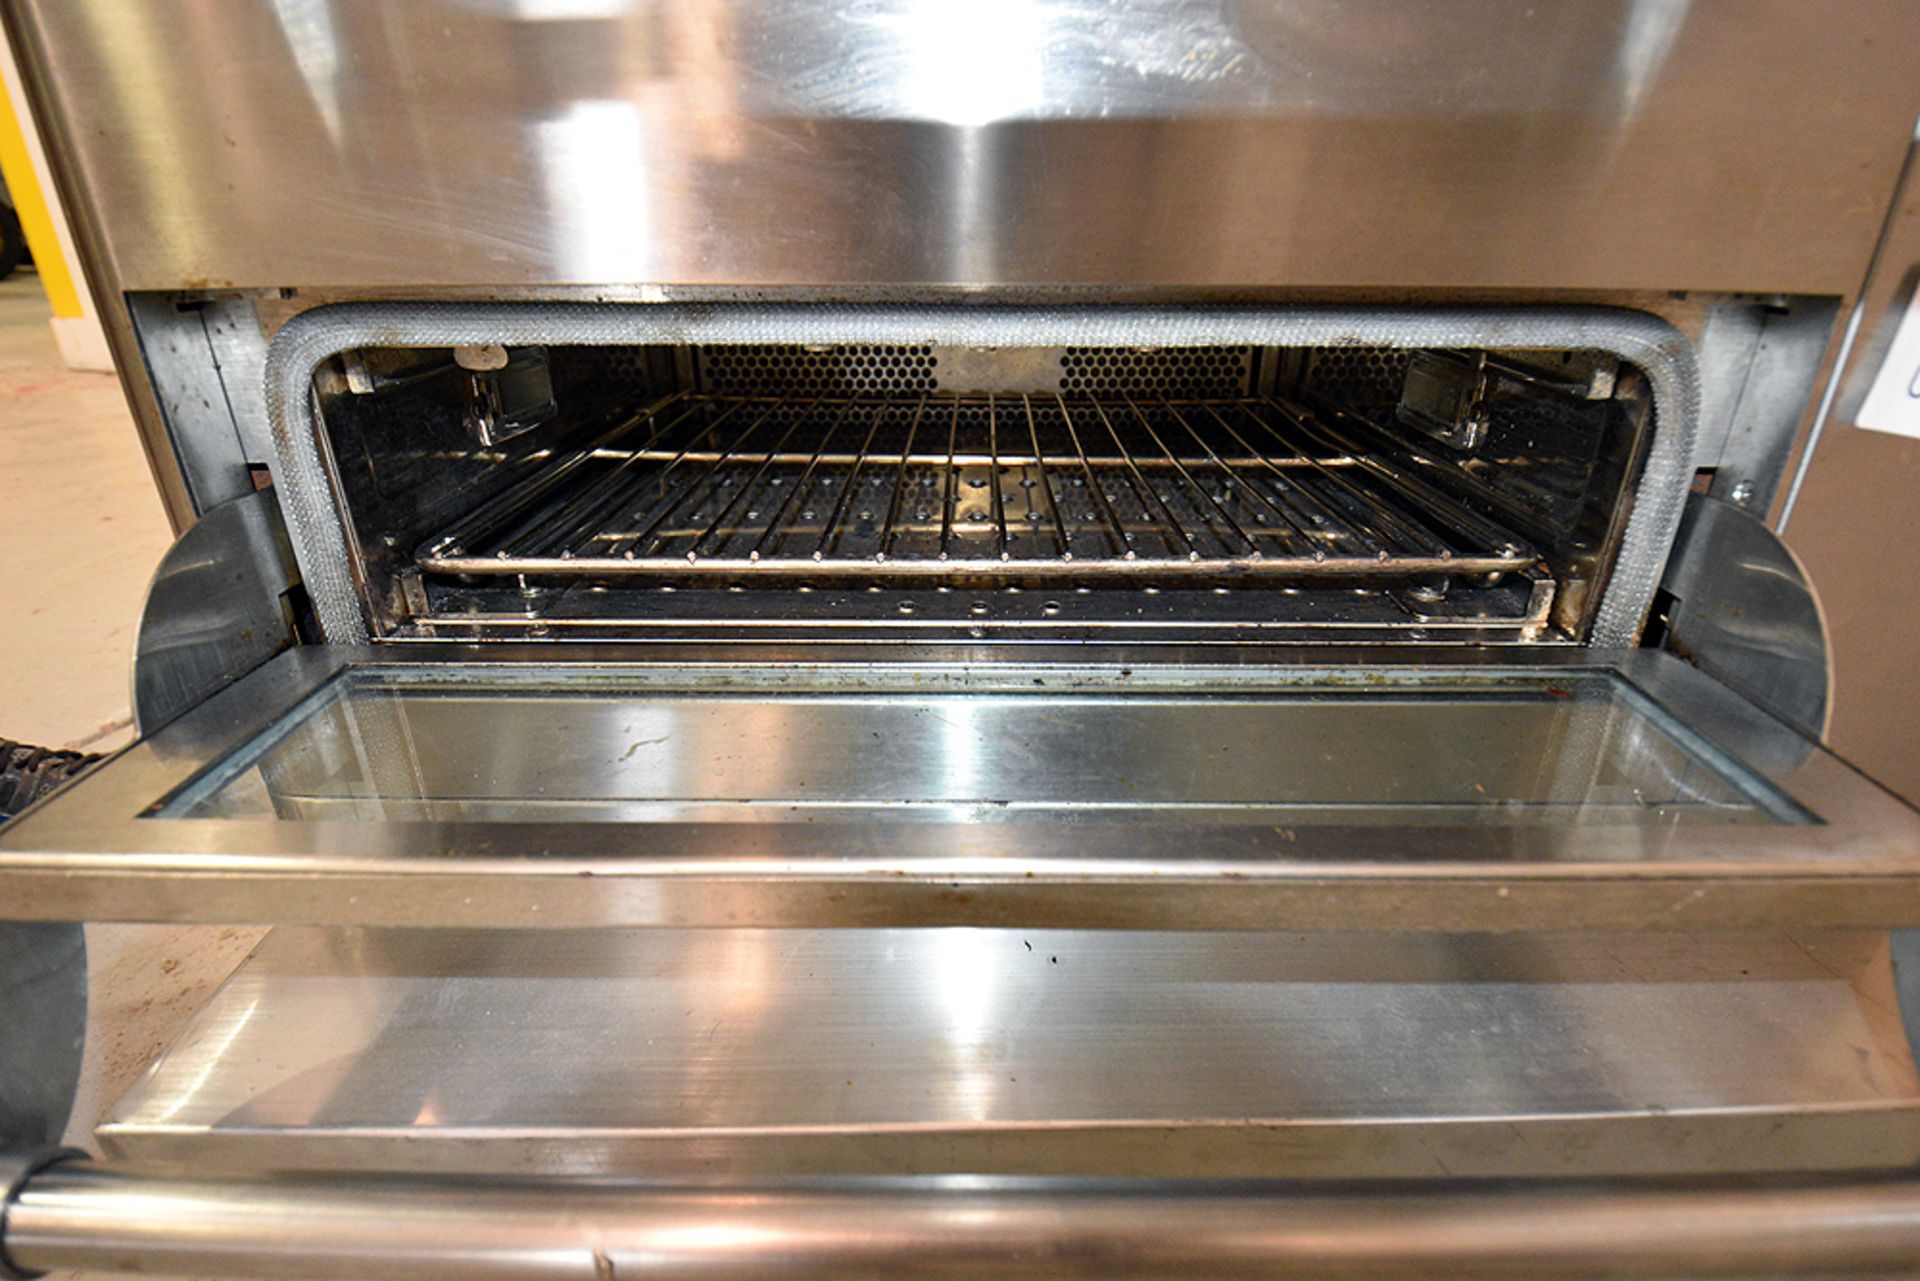 TurboChef Double Batch Ventless Countertop Oven - Image 7 of 8